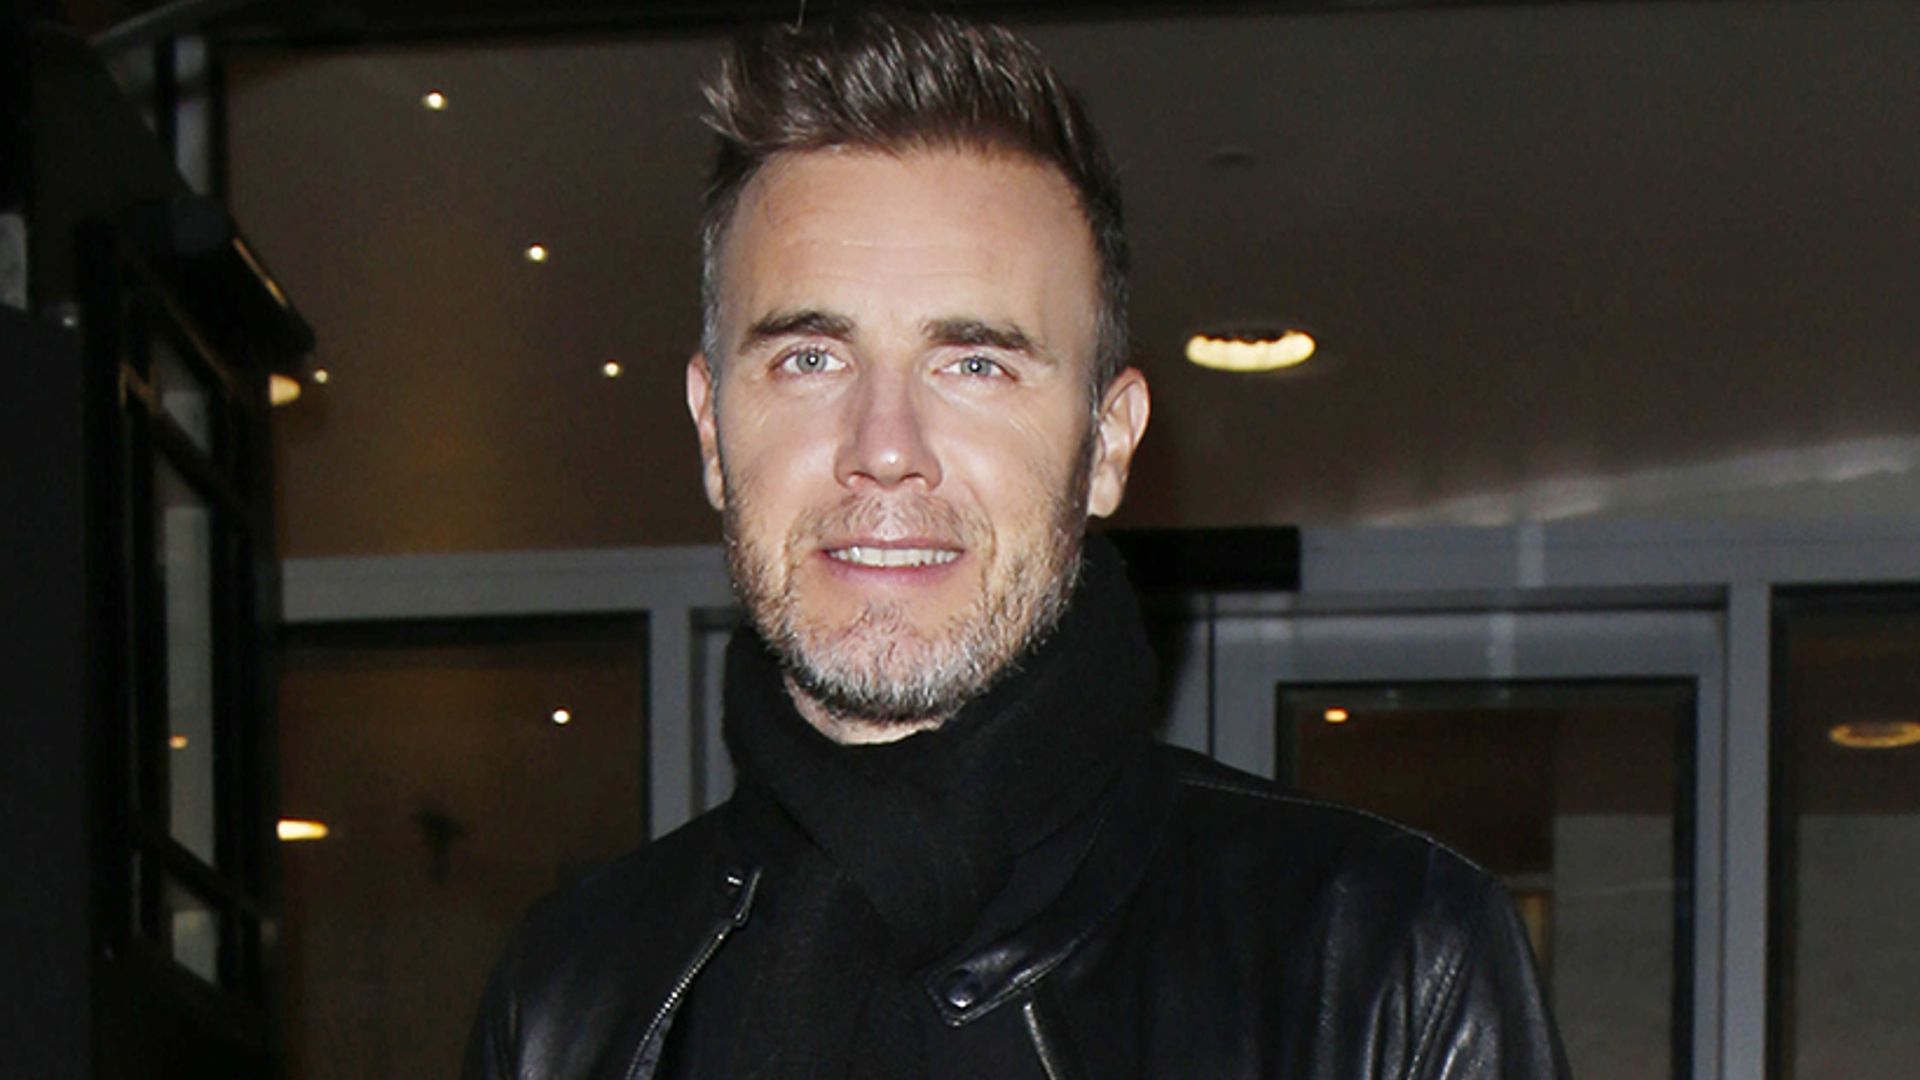 Gary Barlow just washed his hair for the first time in... 14 years!